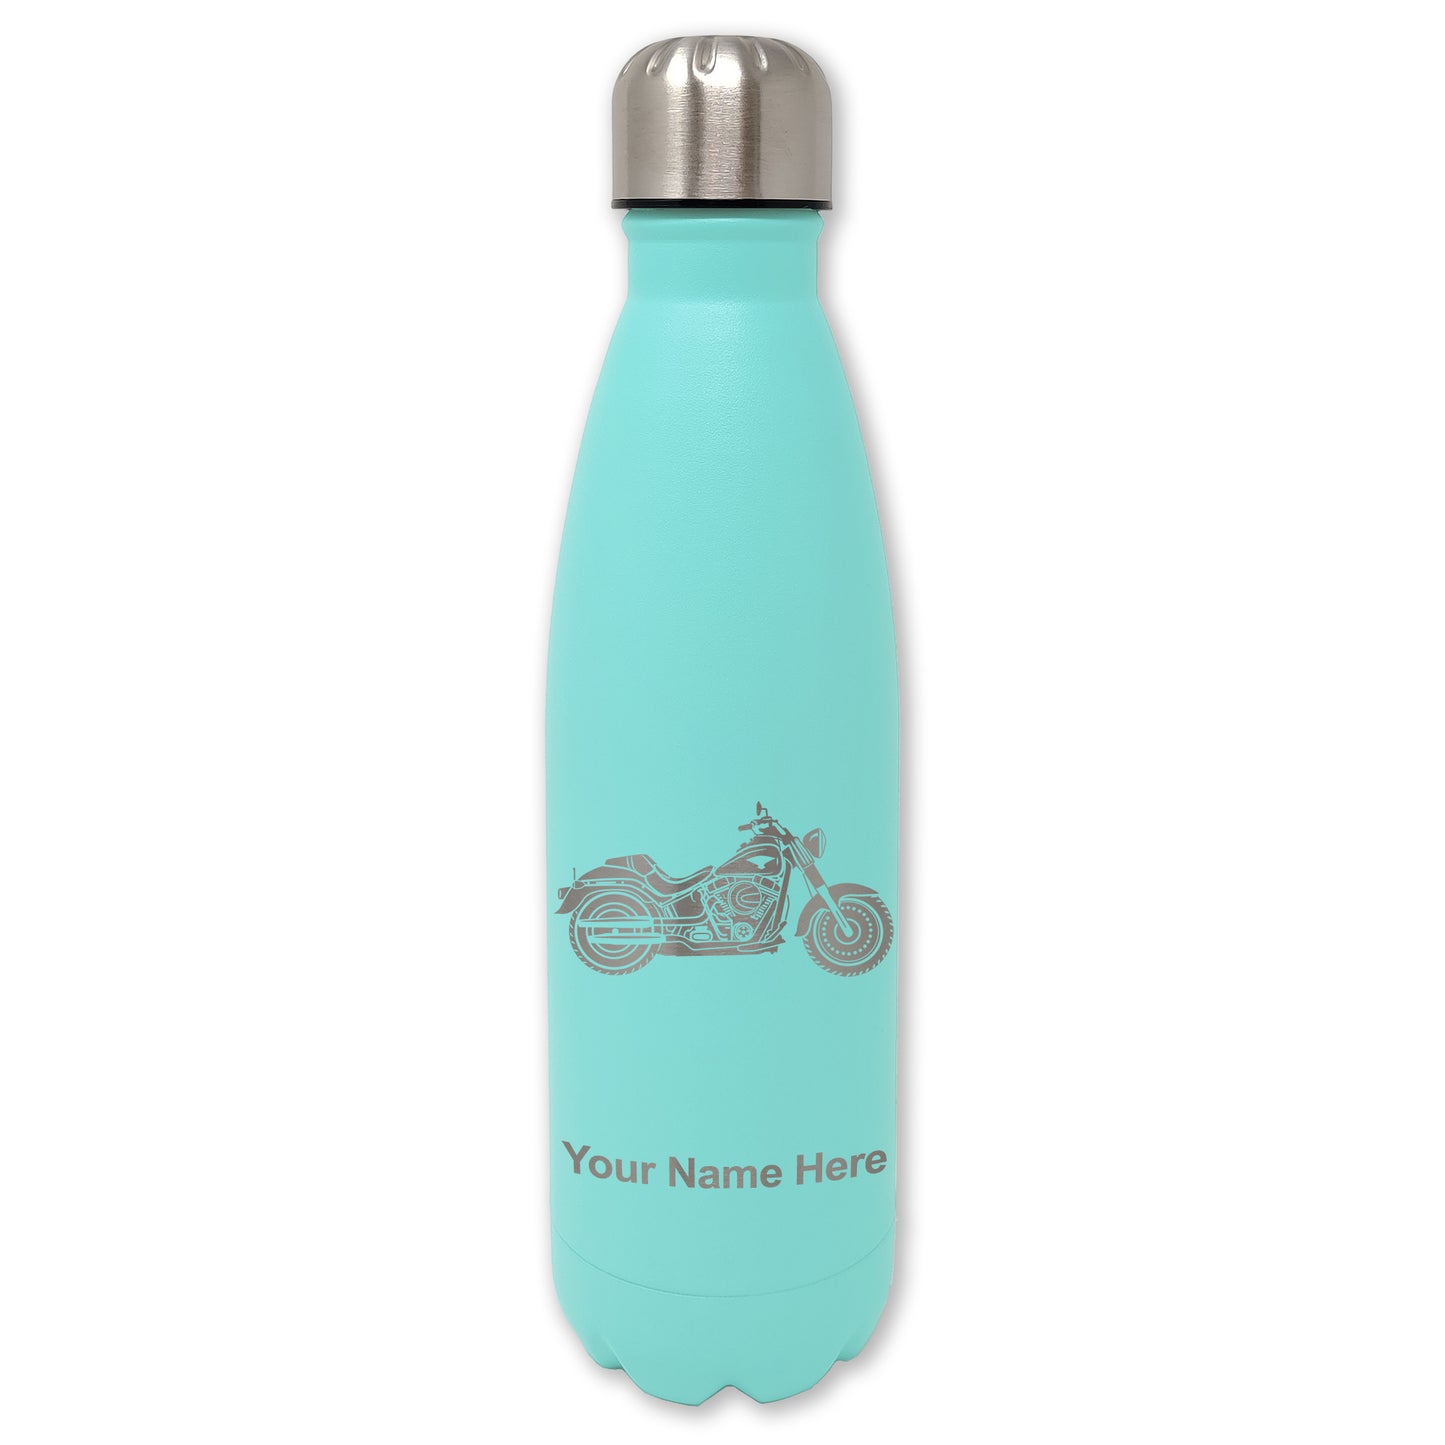 LaserGram Double Wall Water Bottle, Motorcycle, Personalized Engraving Included